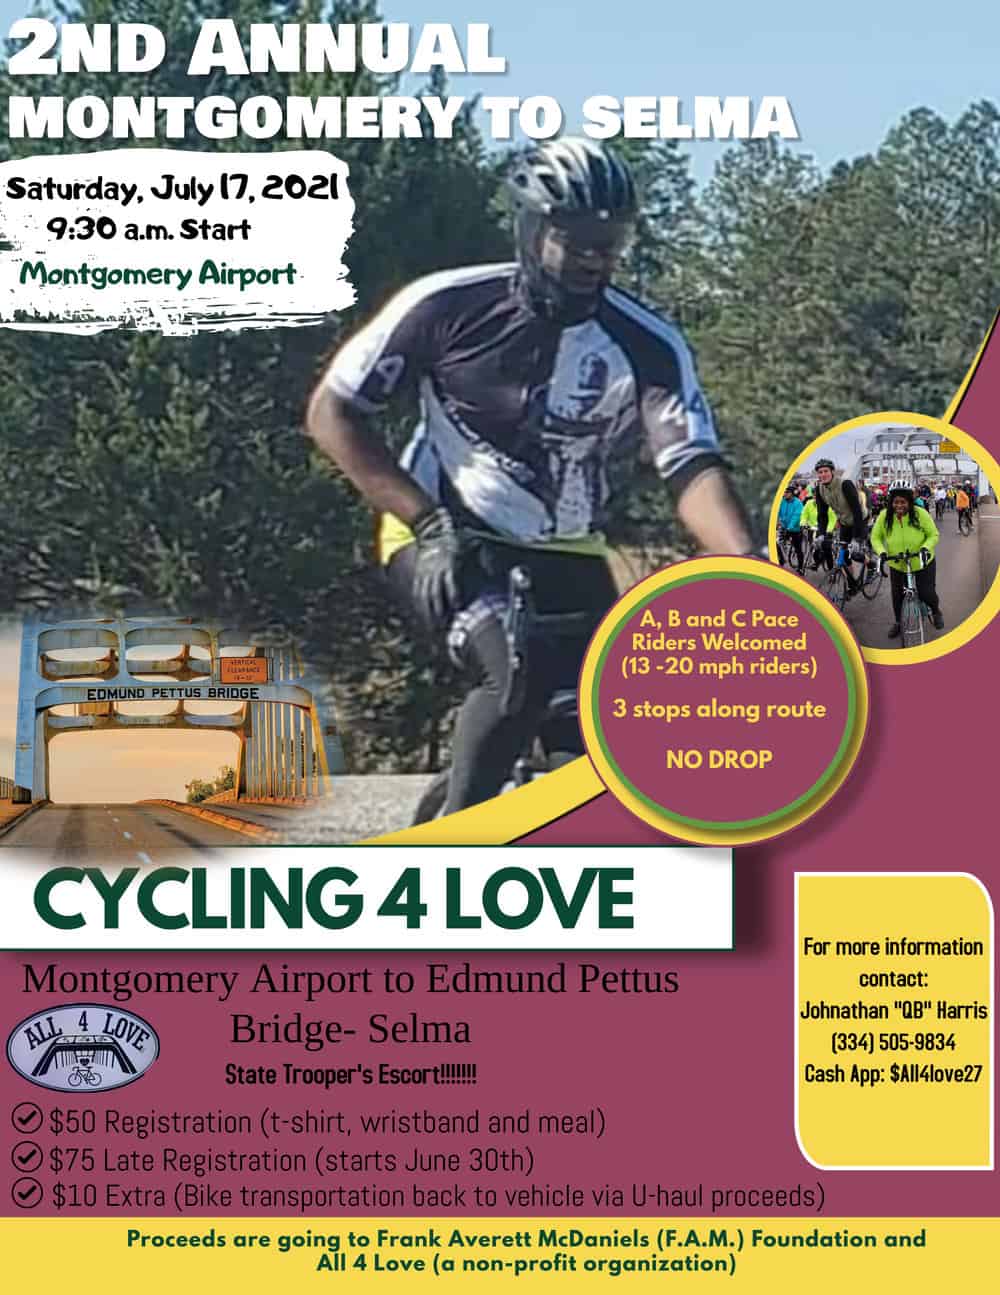 2nd_Annual_Montgomery_to_Selma_Cycling_4_Love_002.jpg